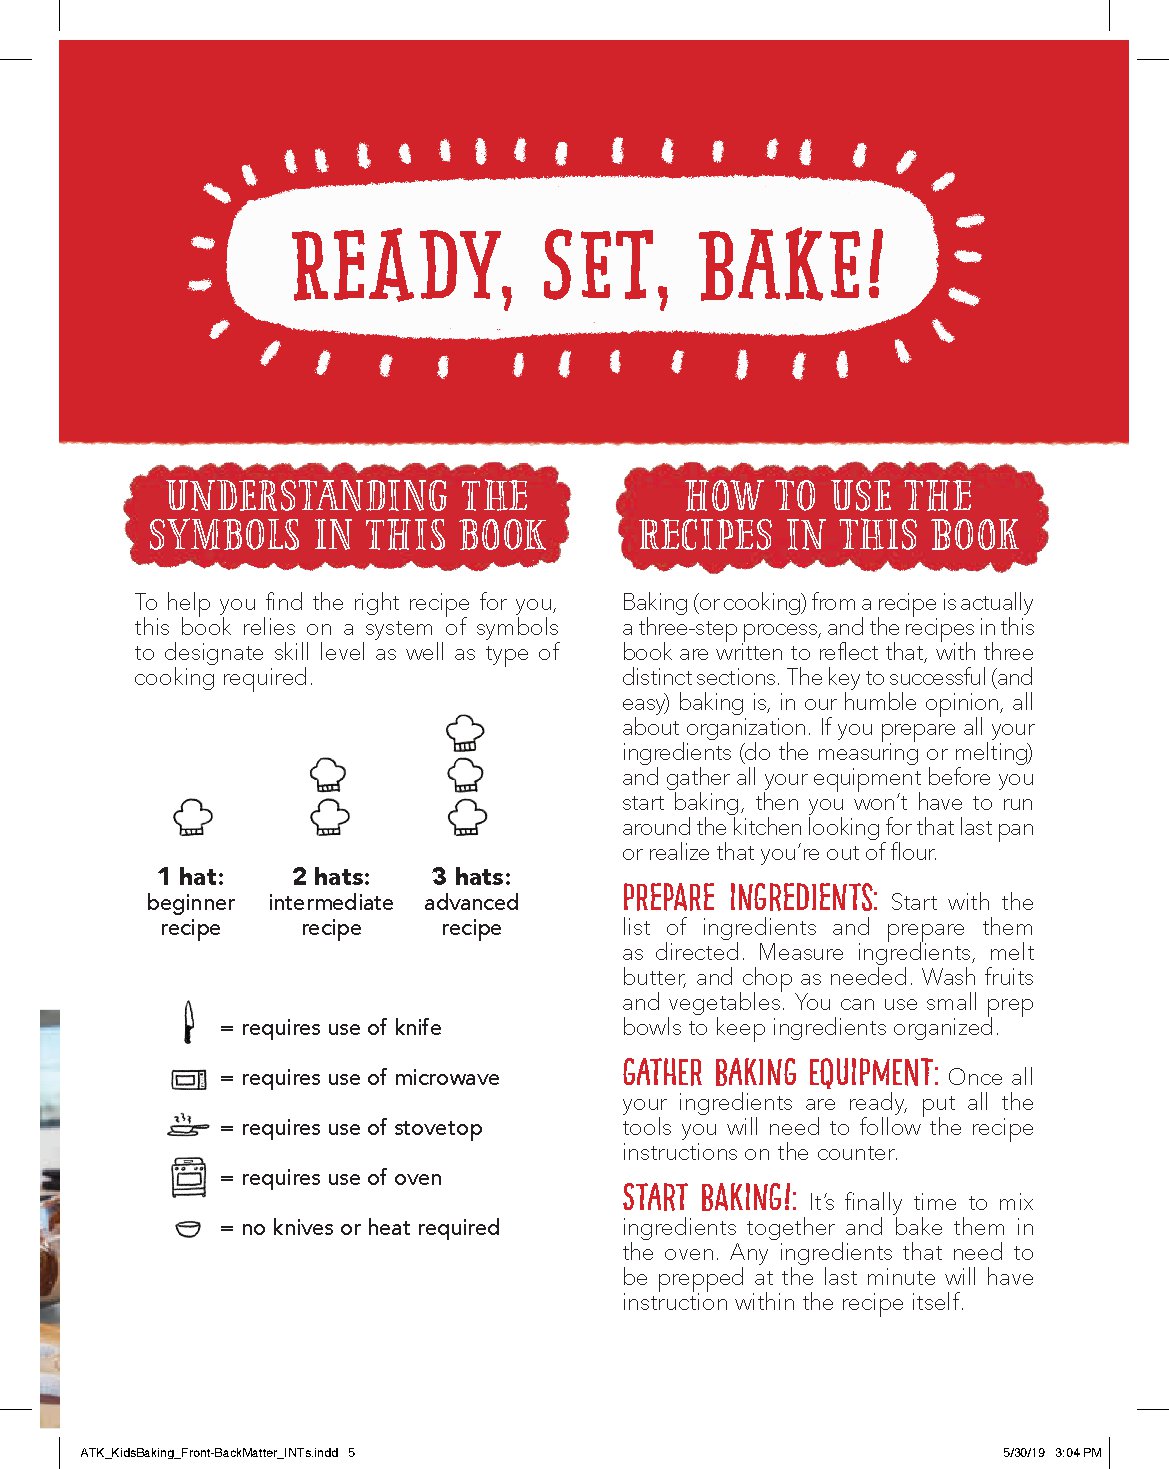 The Complete Baking Book for Young Chefs